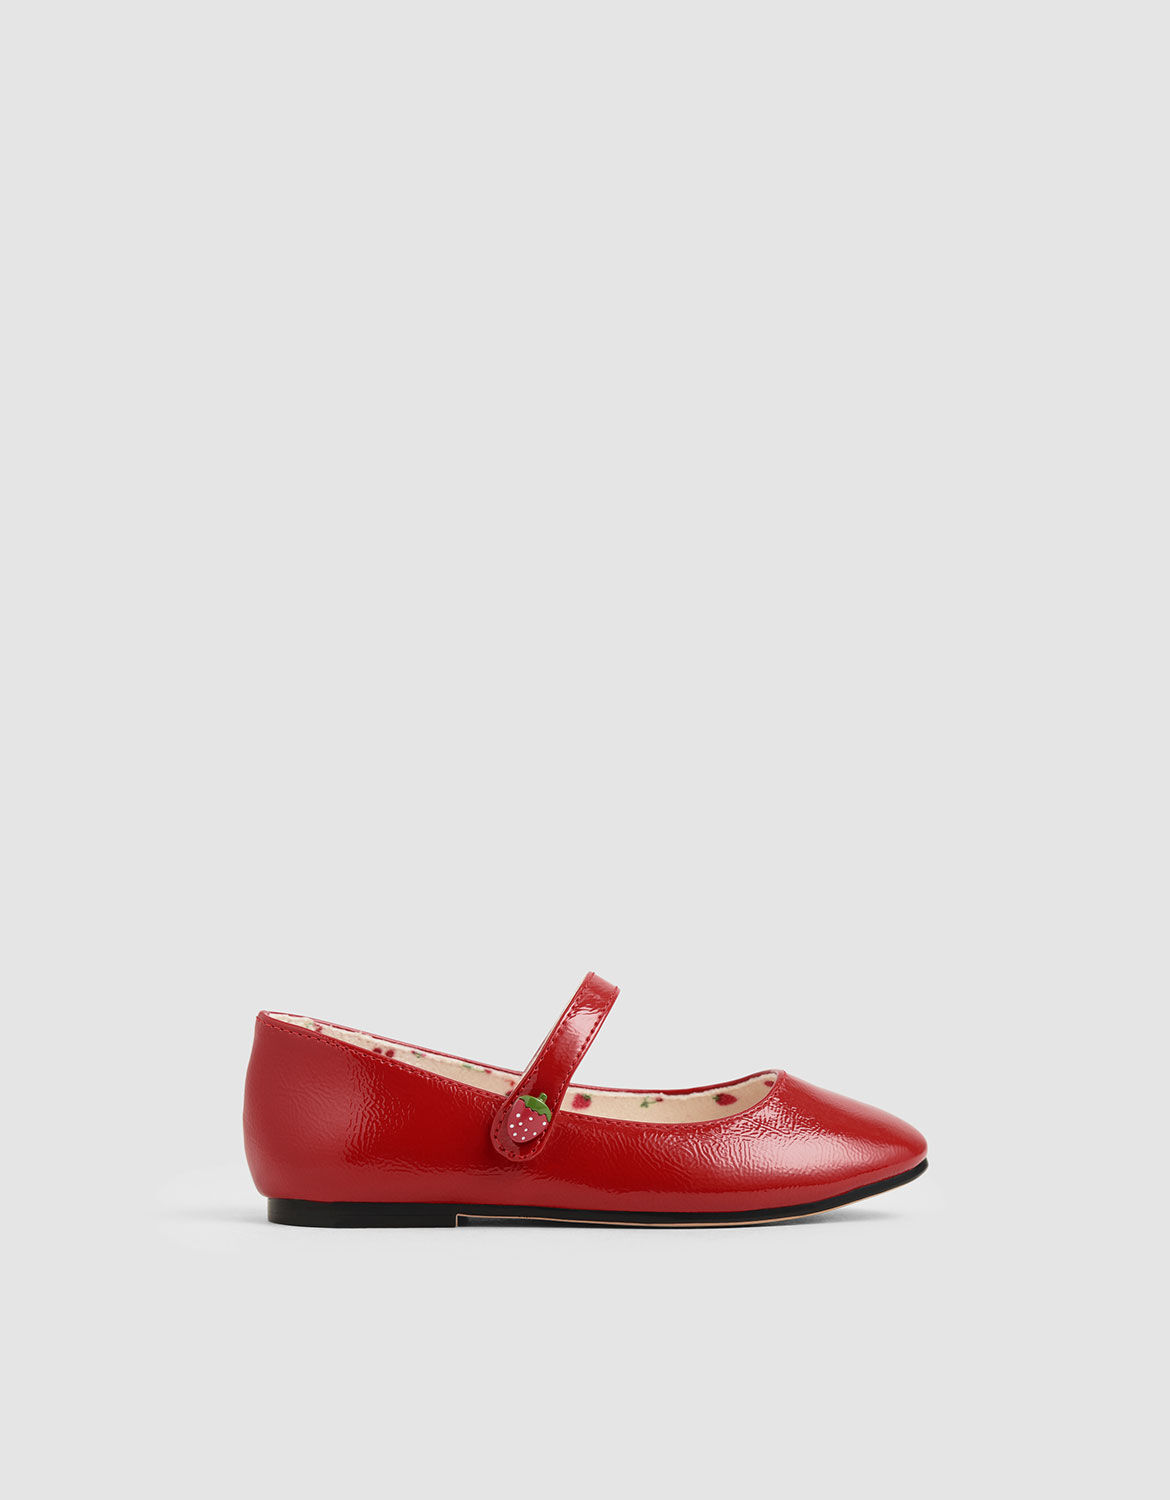 red mary jane shoes australia